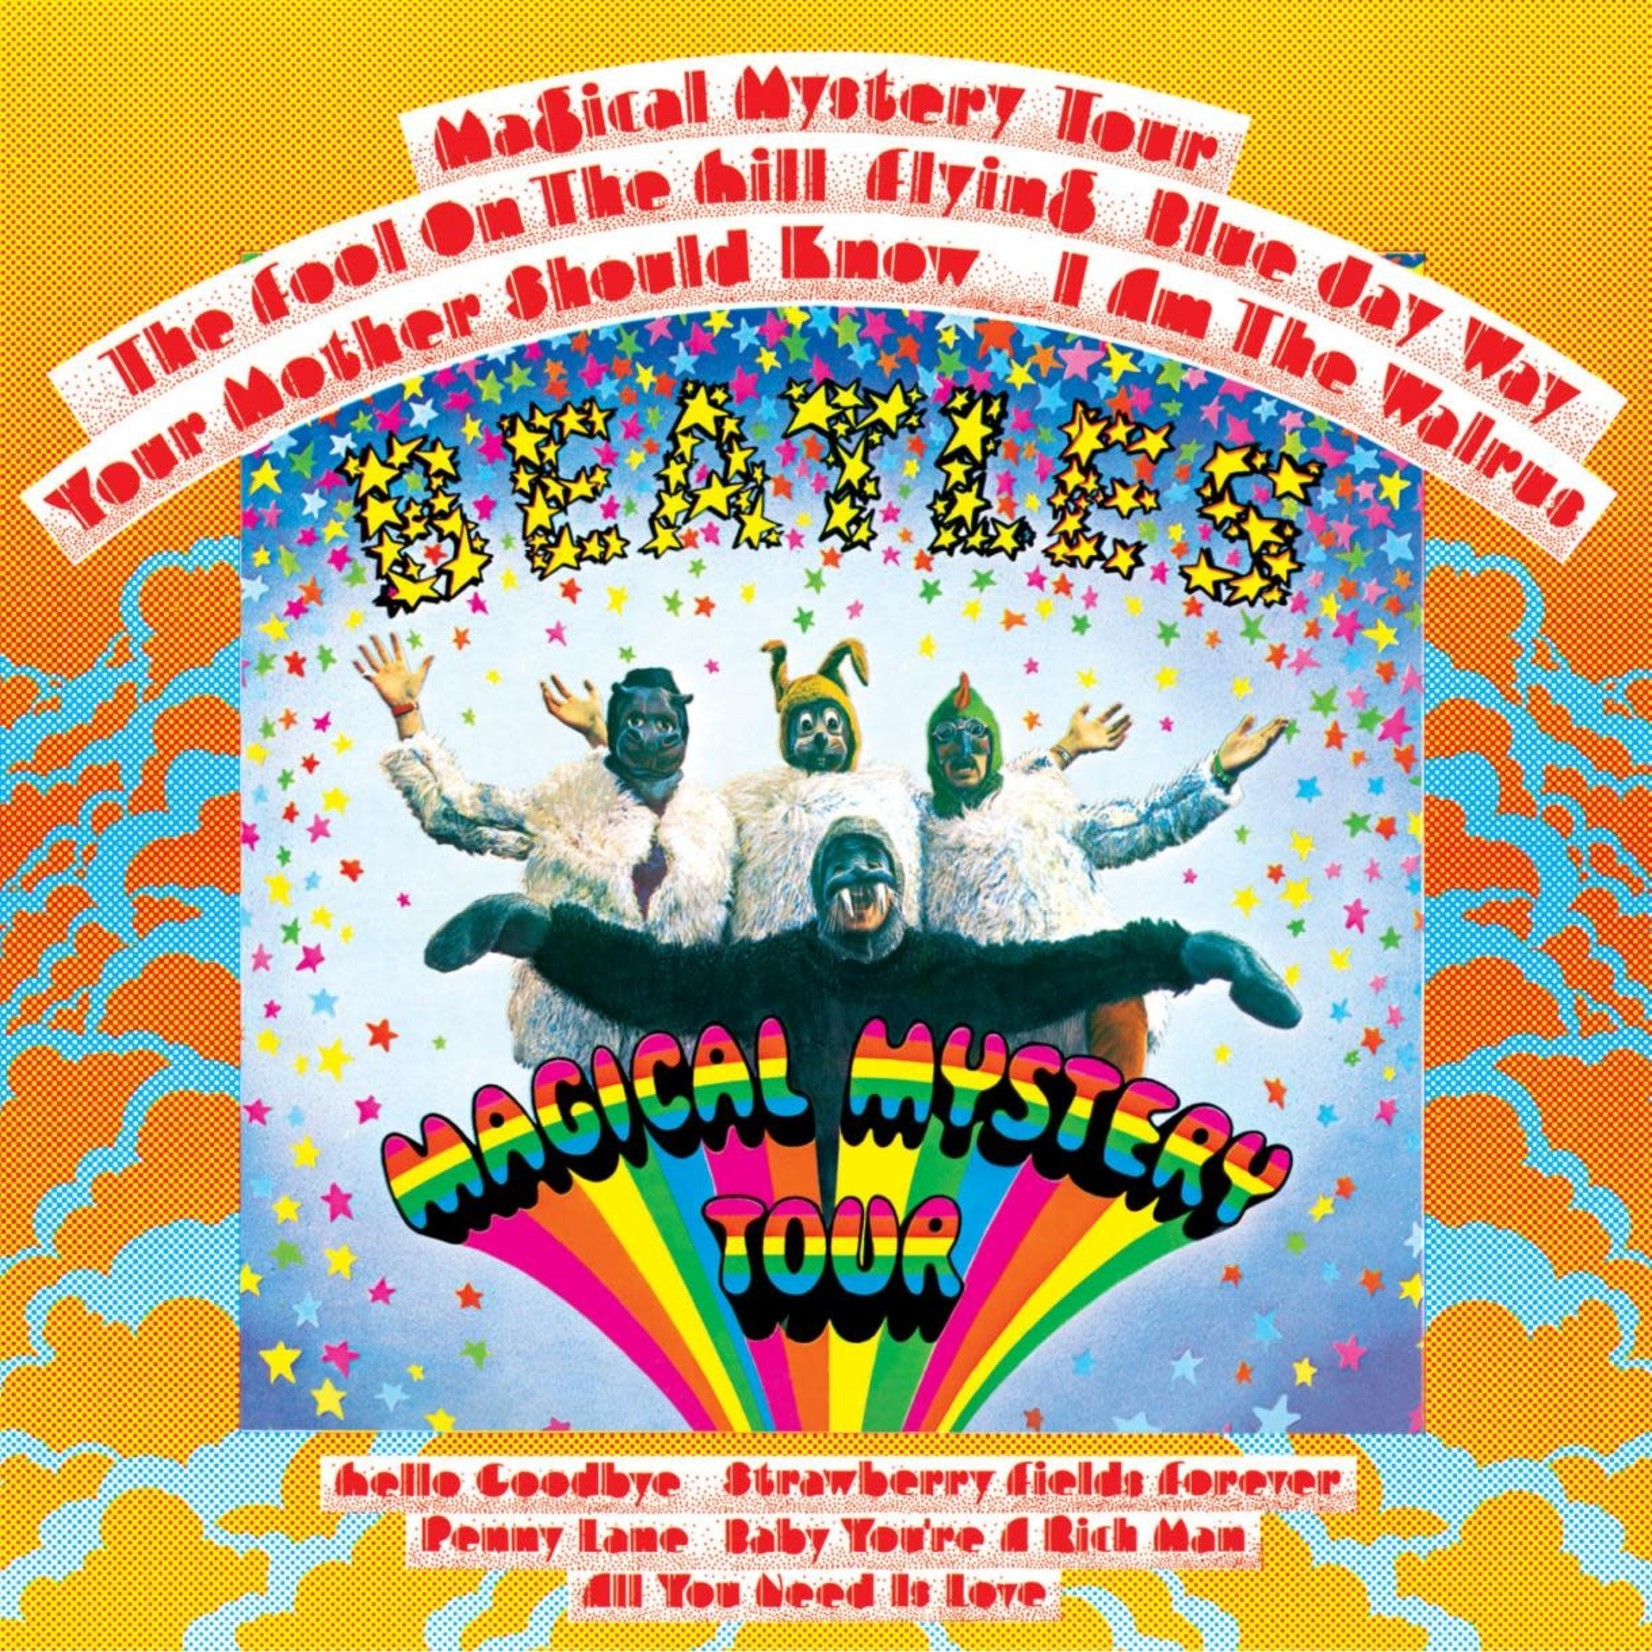 [Vintage] Beatles - Magical Mystery Tour (reissue, with booklet)